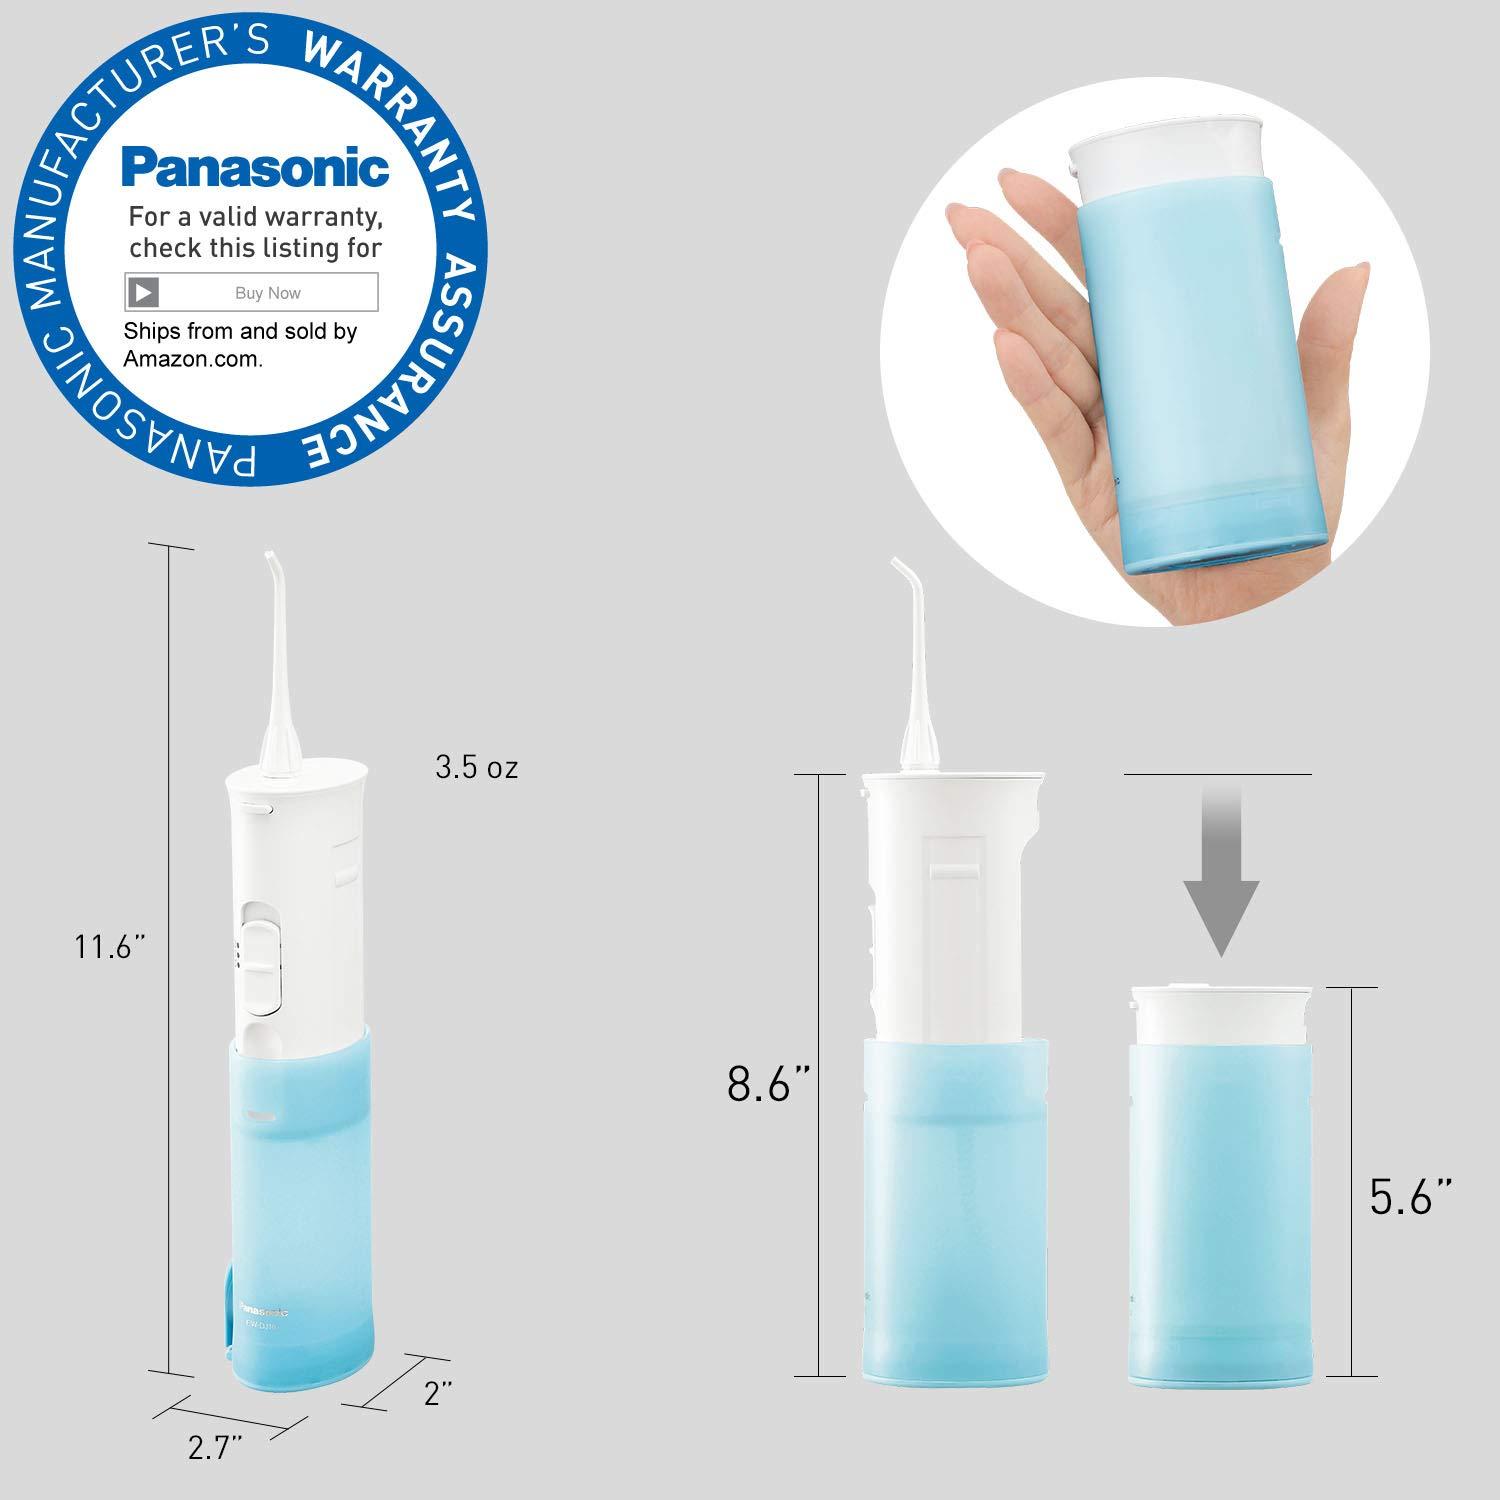  Panasonic Cordless Dental Water Flosser, Dual-Speed Pulse Oral  Irrigator, Collapsible, Design for Travel - EW-DJ10-A